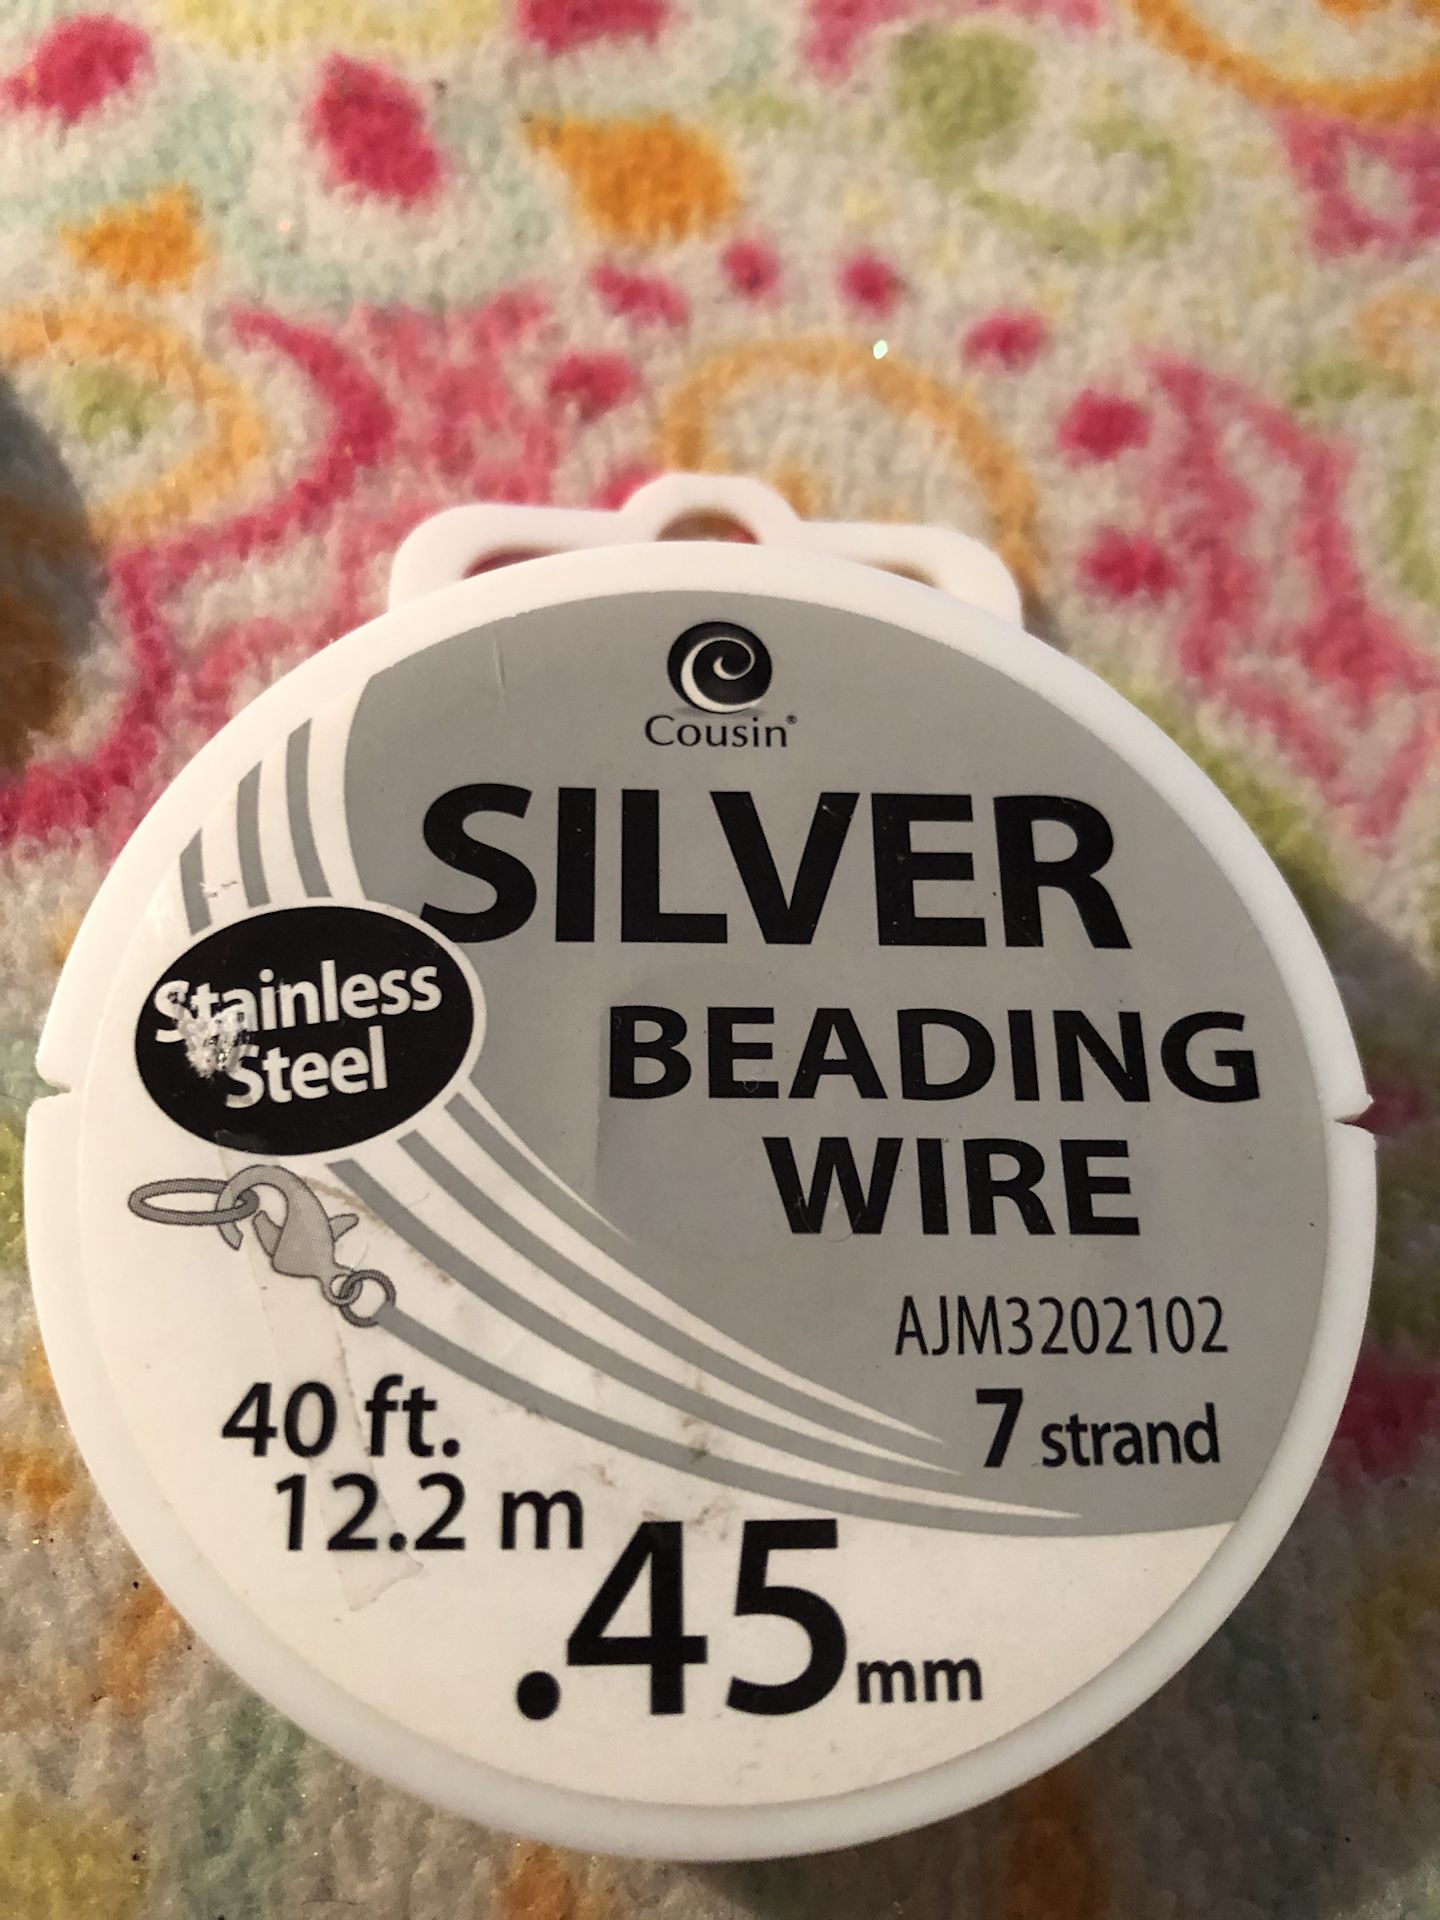 40 ft. Silver Beading wire